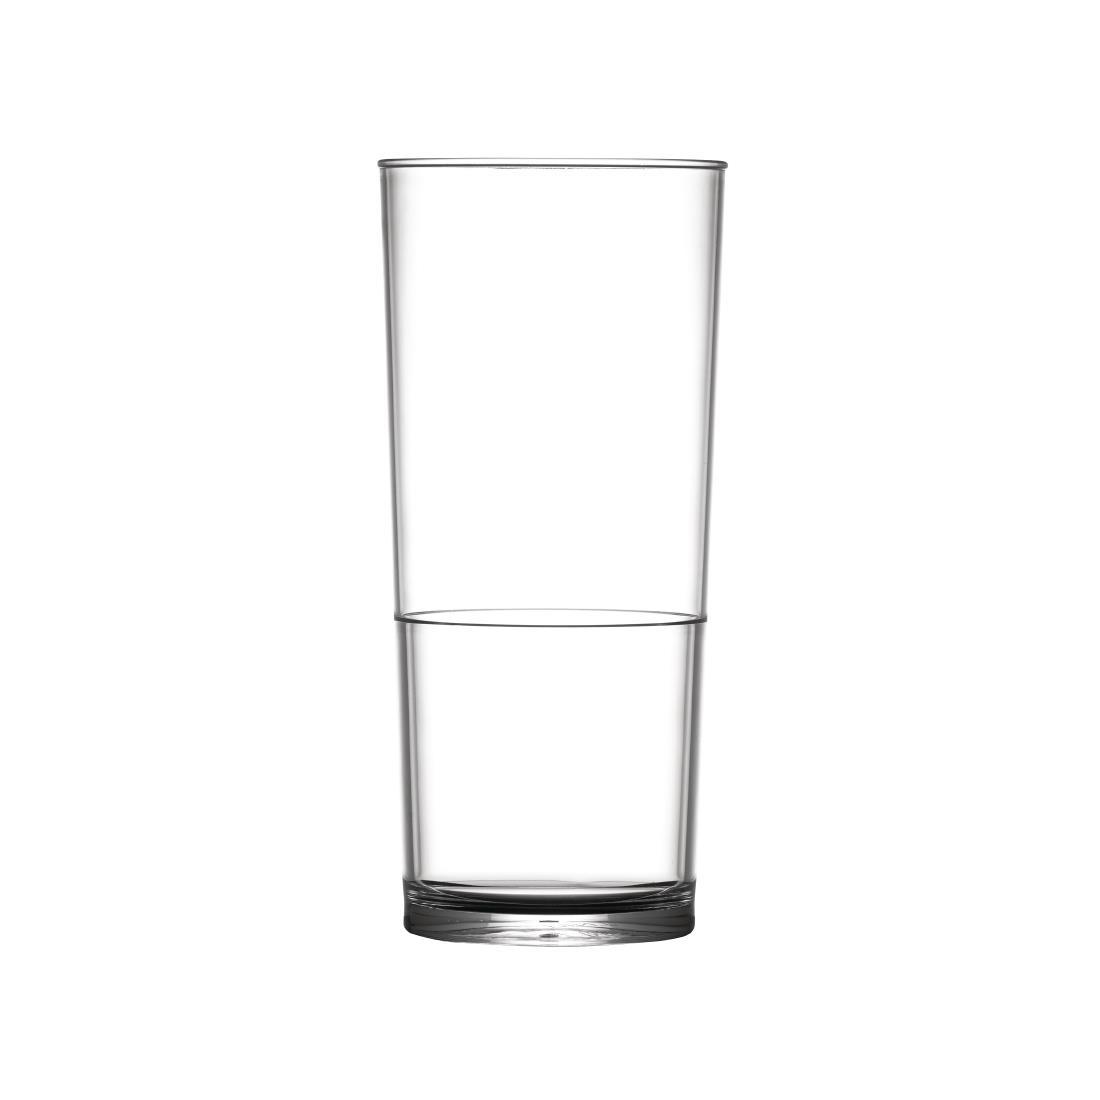 BBP Polycarbonate Hi Ball In2Stax Glasses Pint (Pack of 48) - DC419  - 1